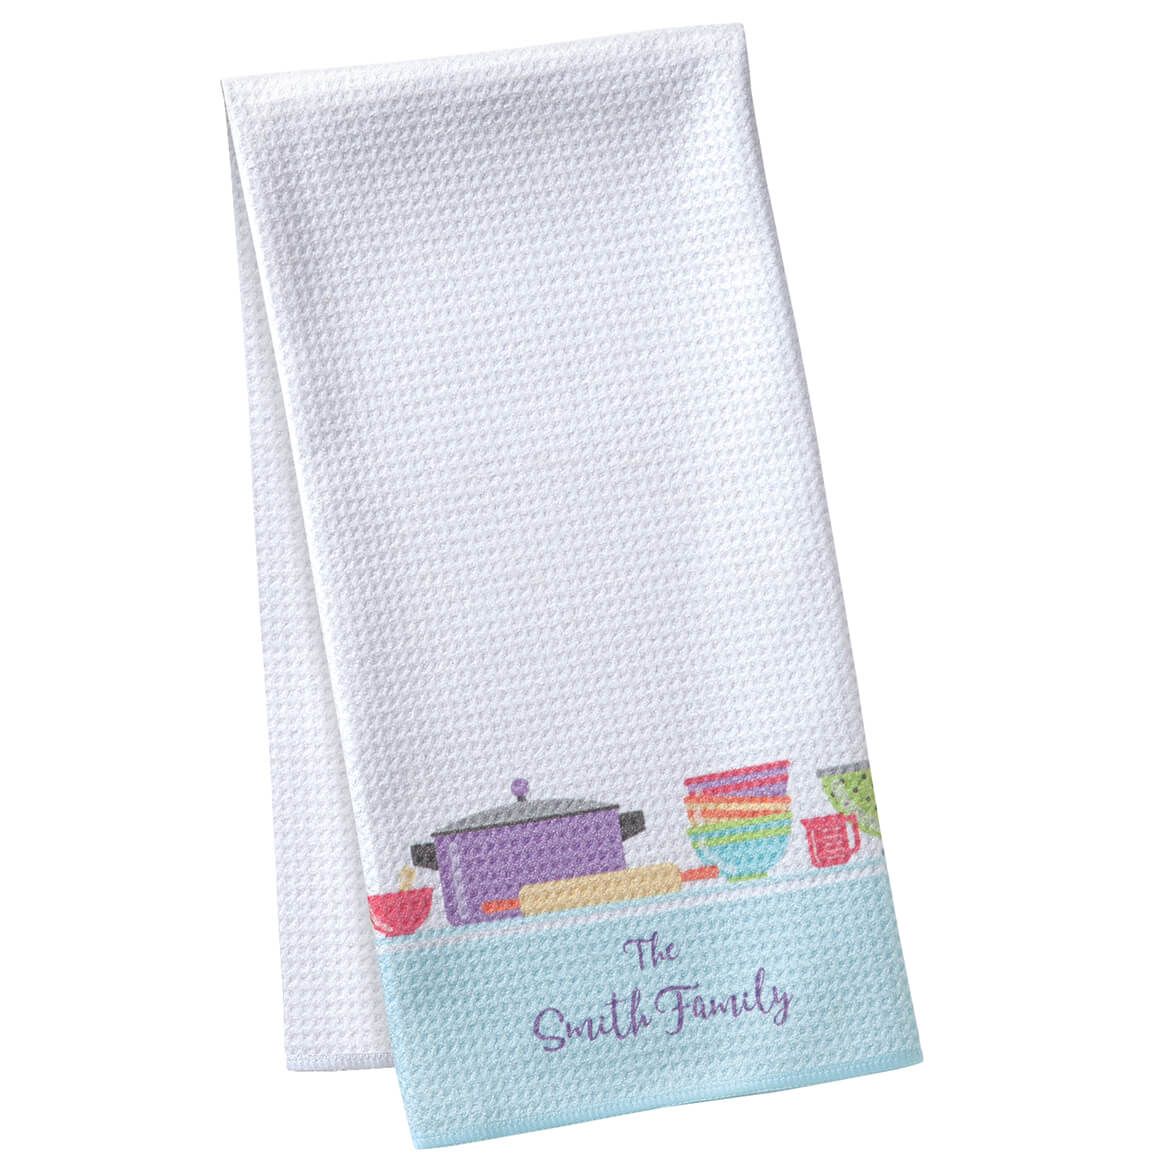 Personalized Kitchenware Towel by Home Marketplace + '-' + 376610